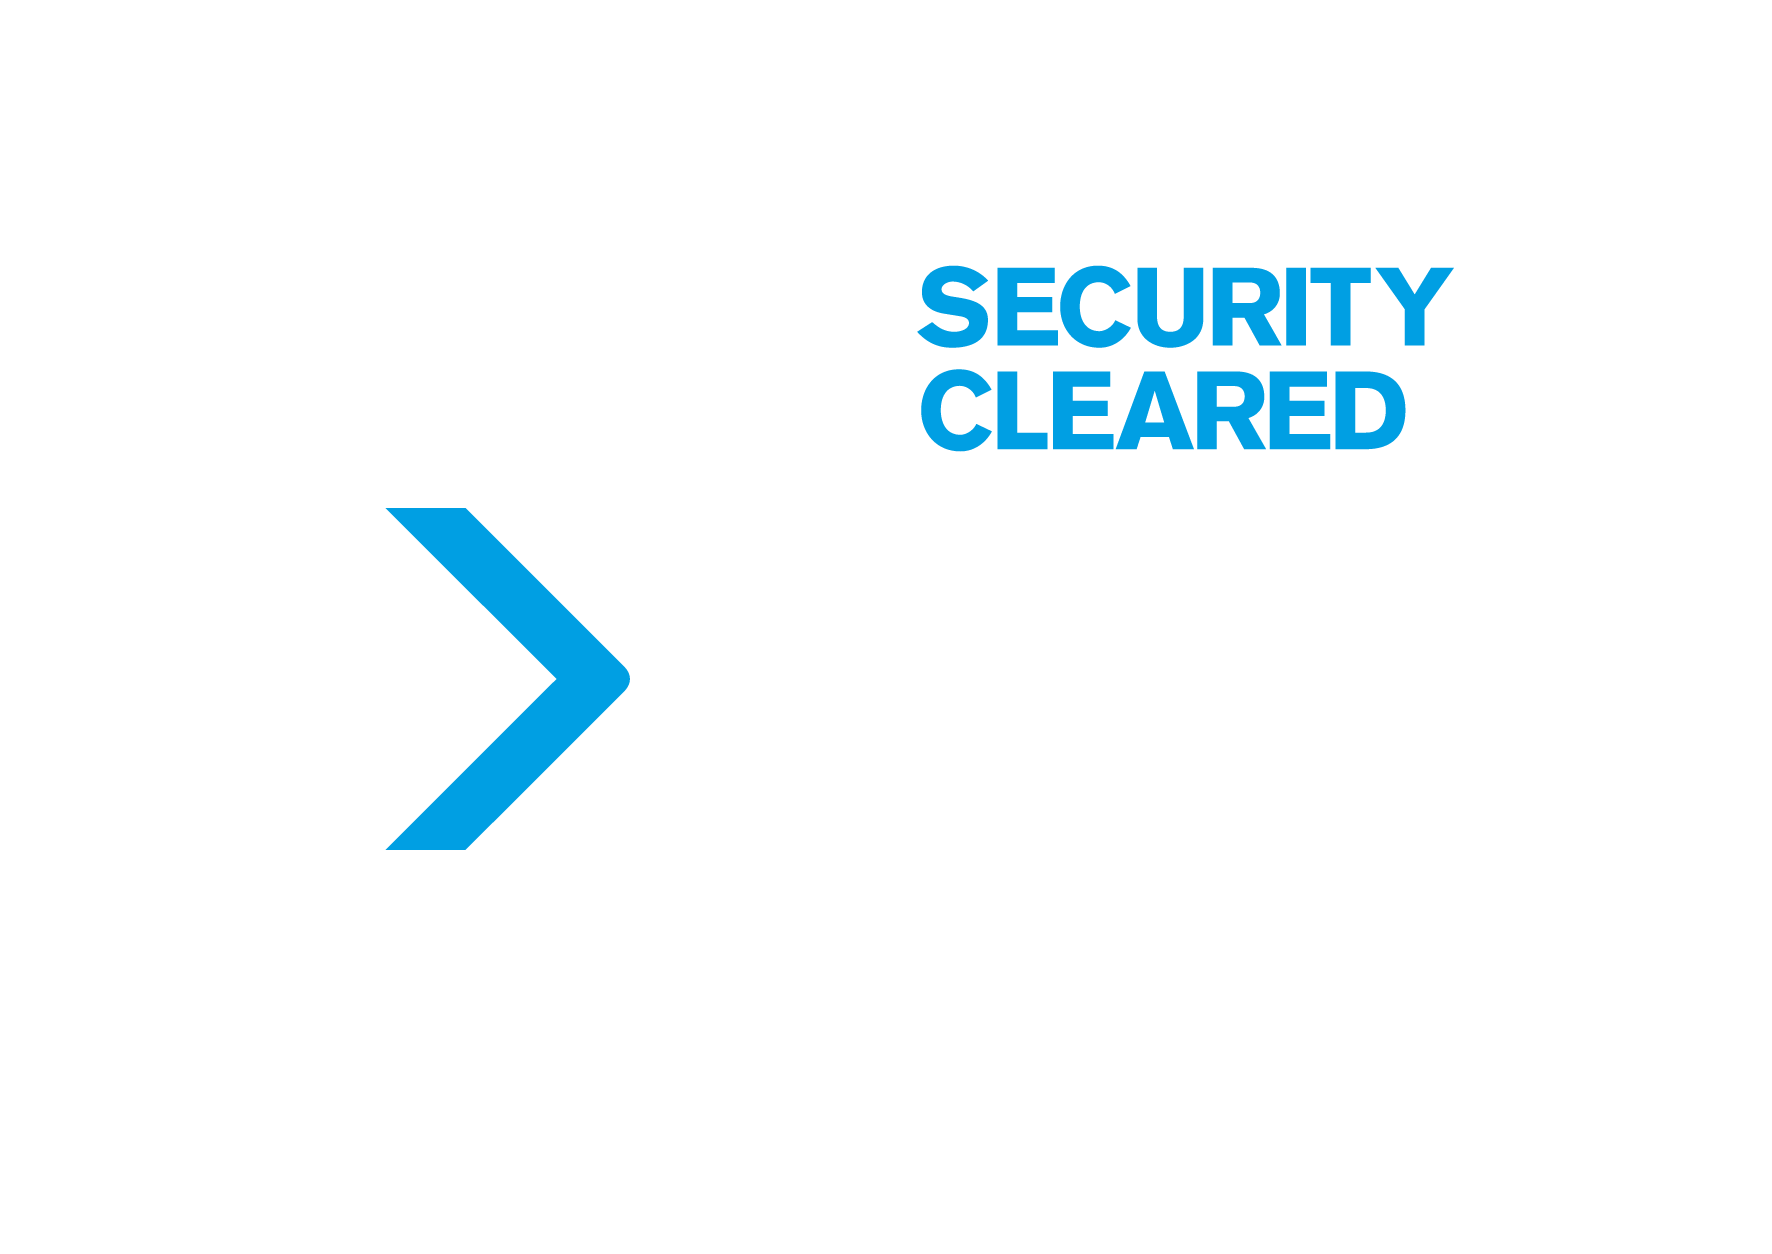 Security Cleared Expo 2021